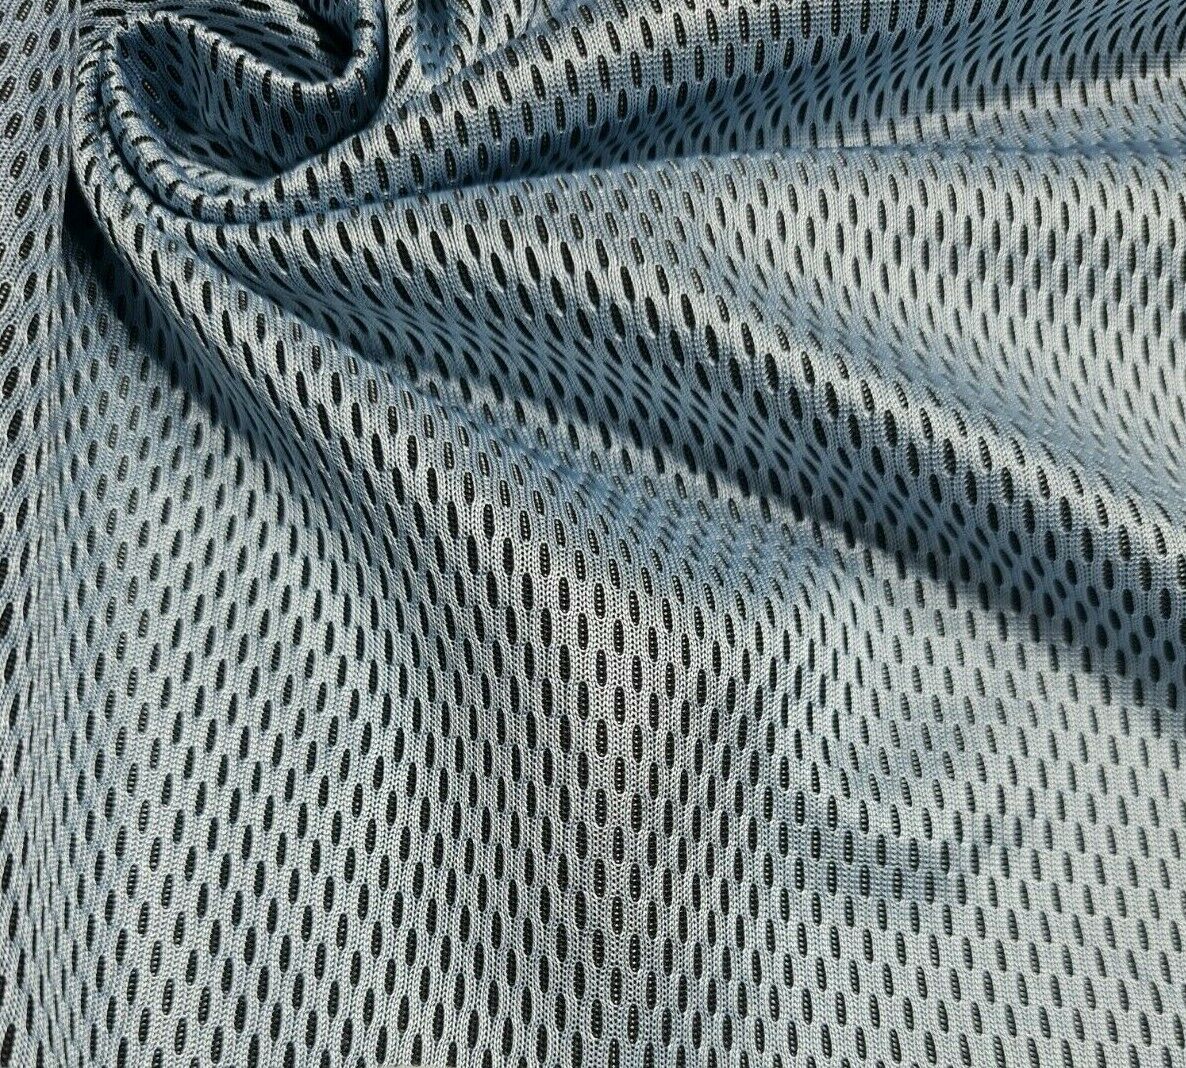 Polyester Square Knit Mesh Fabric by the Yard, 58-60 Wide, 5